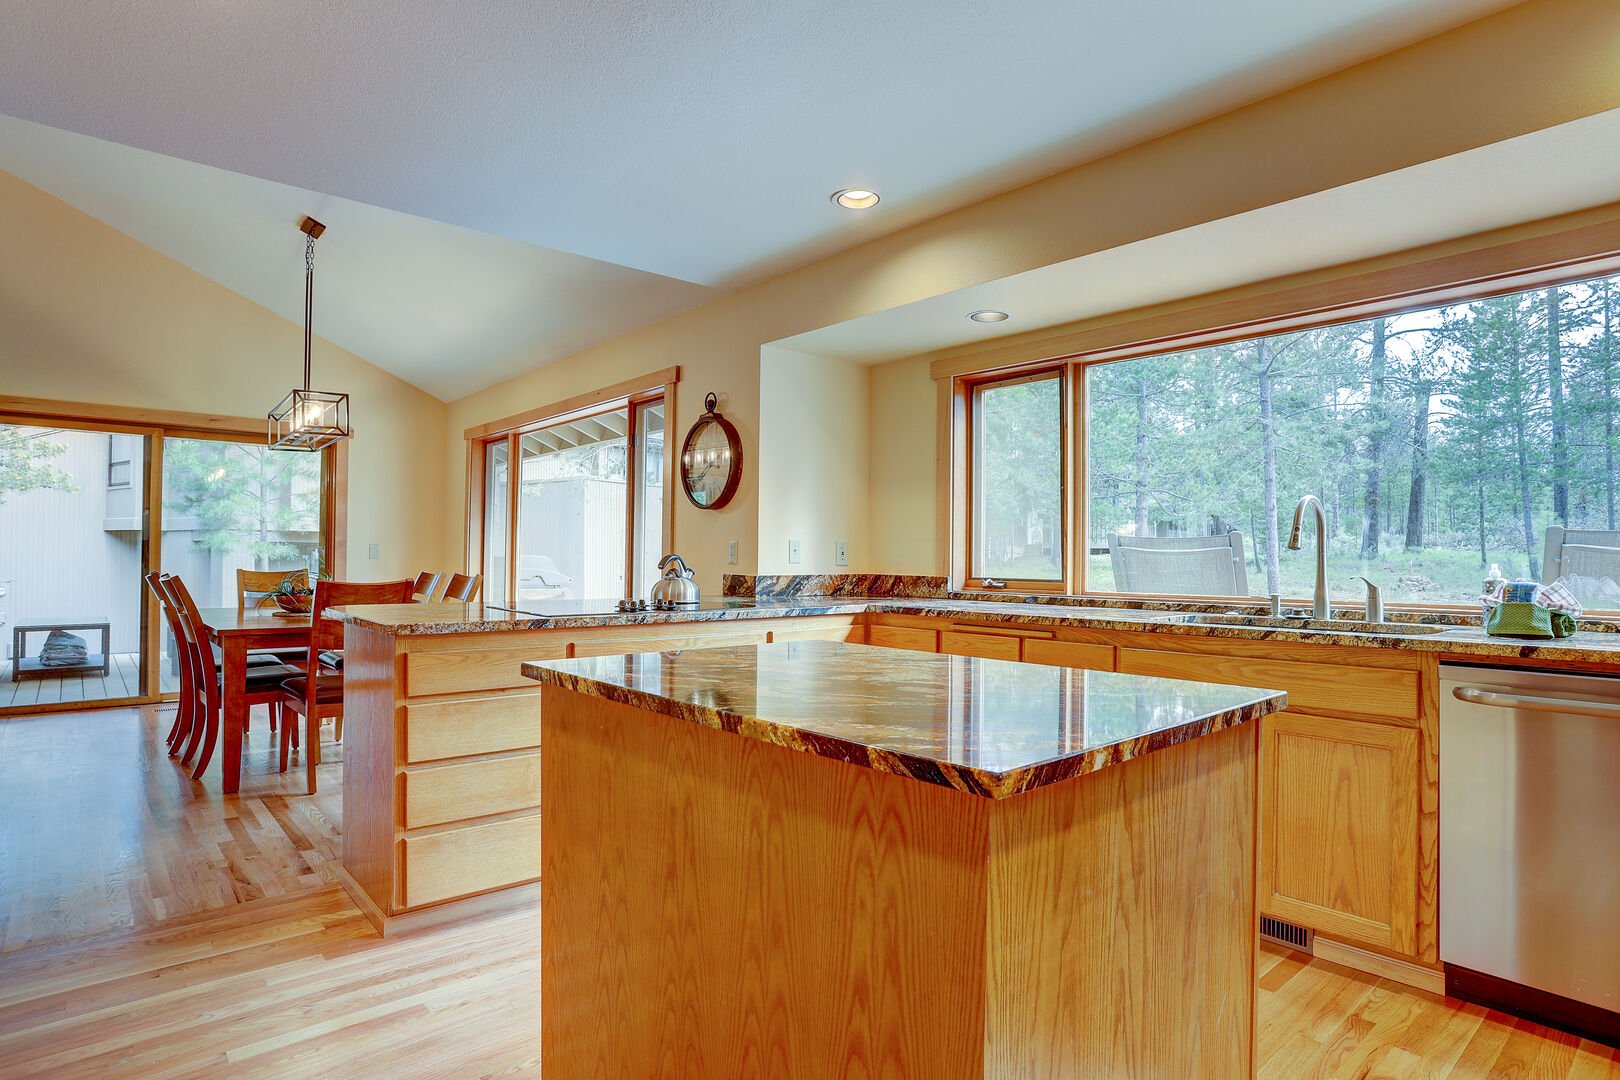 Beautiful granite counter tops throughout the kitchen.